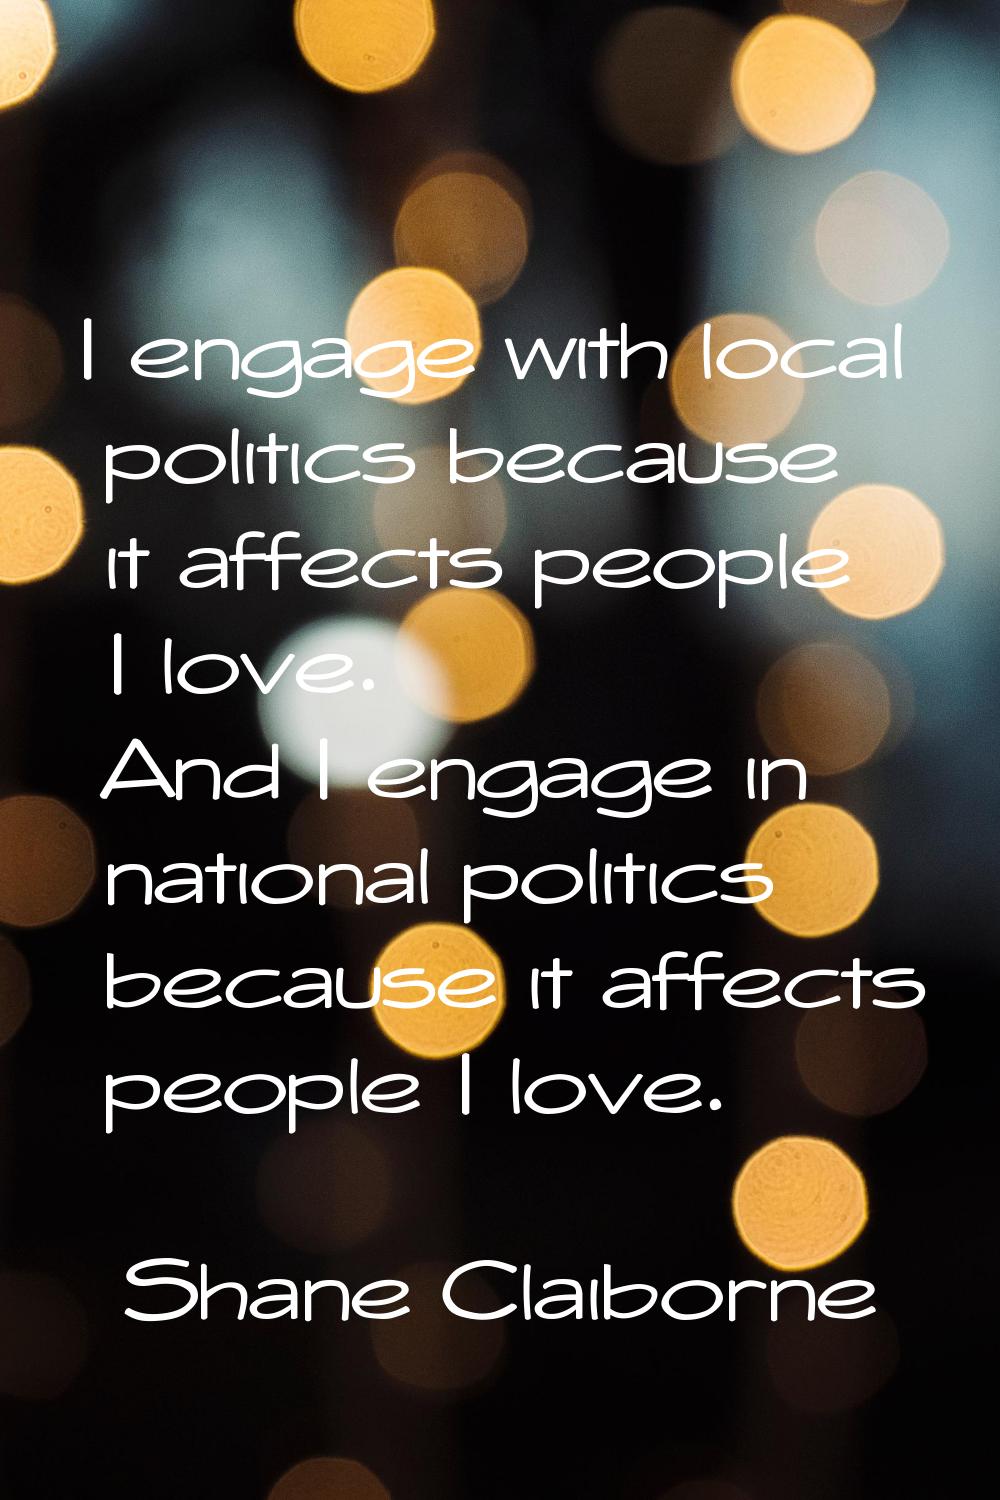 I engage with local politics because it affects people I love. And I engage in national politics be